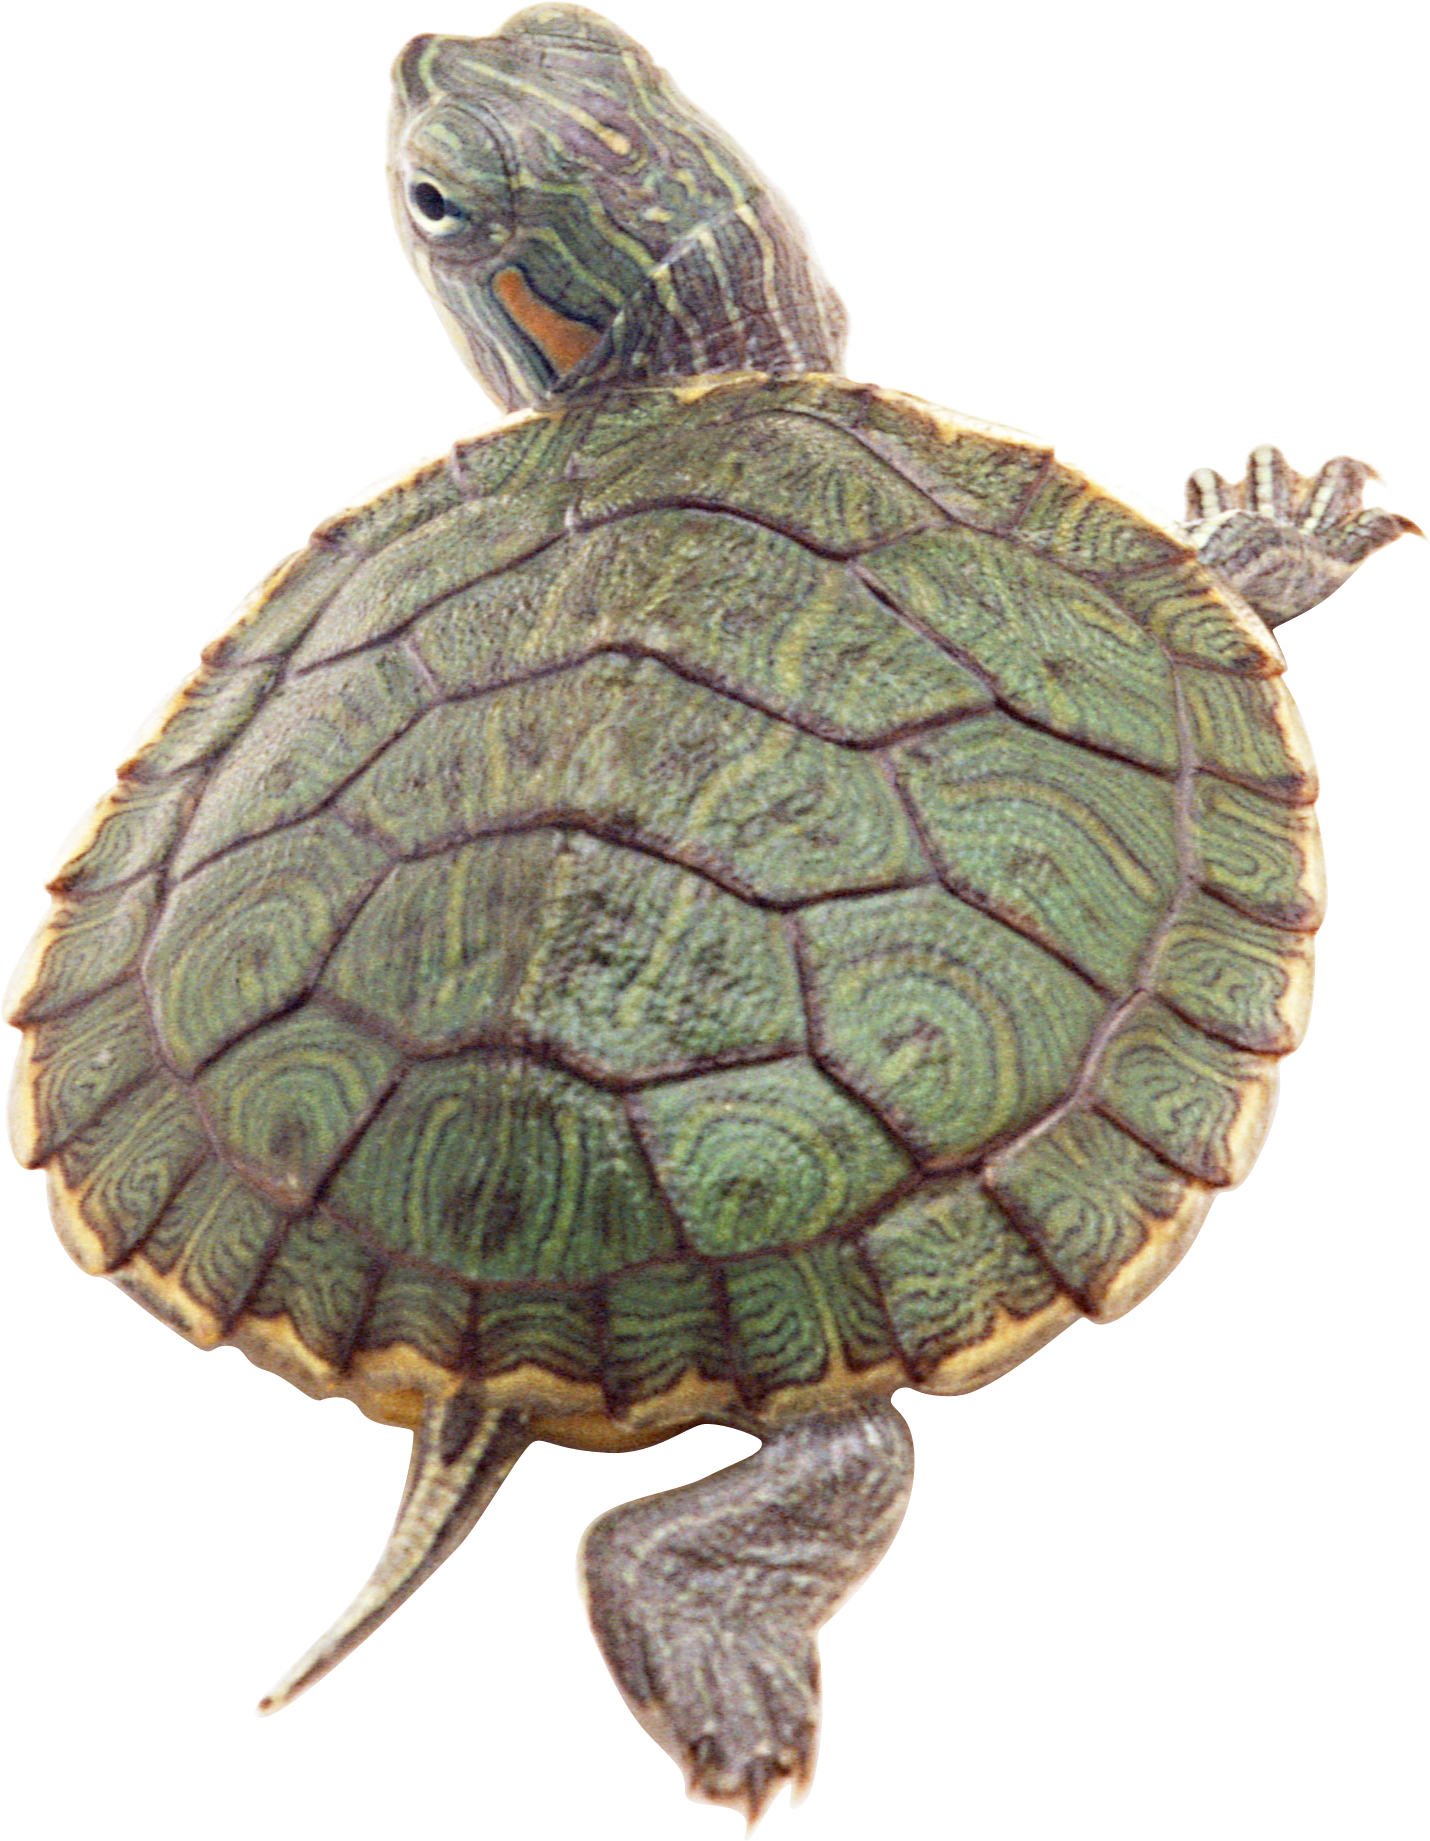 Turtle PNG images Download